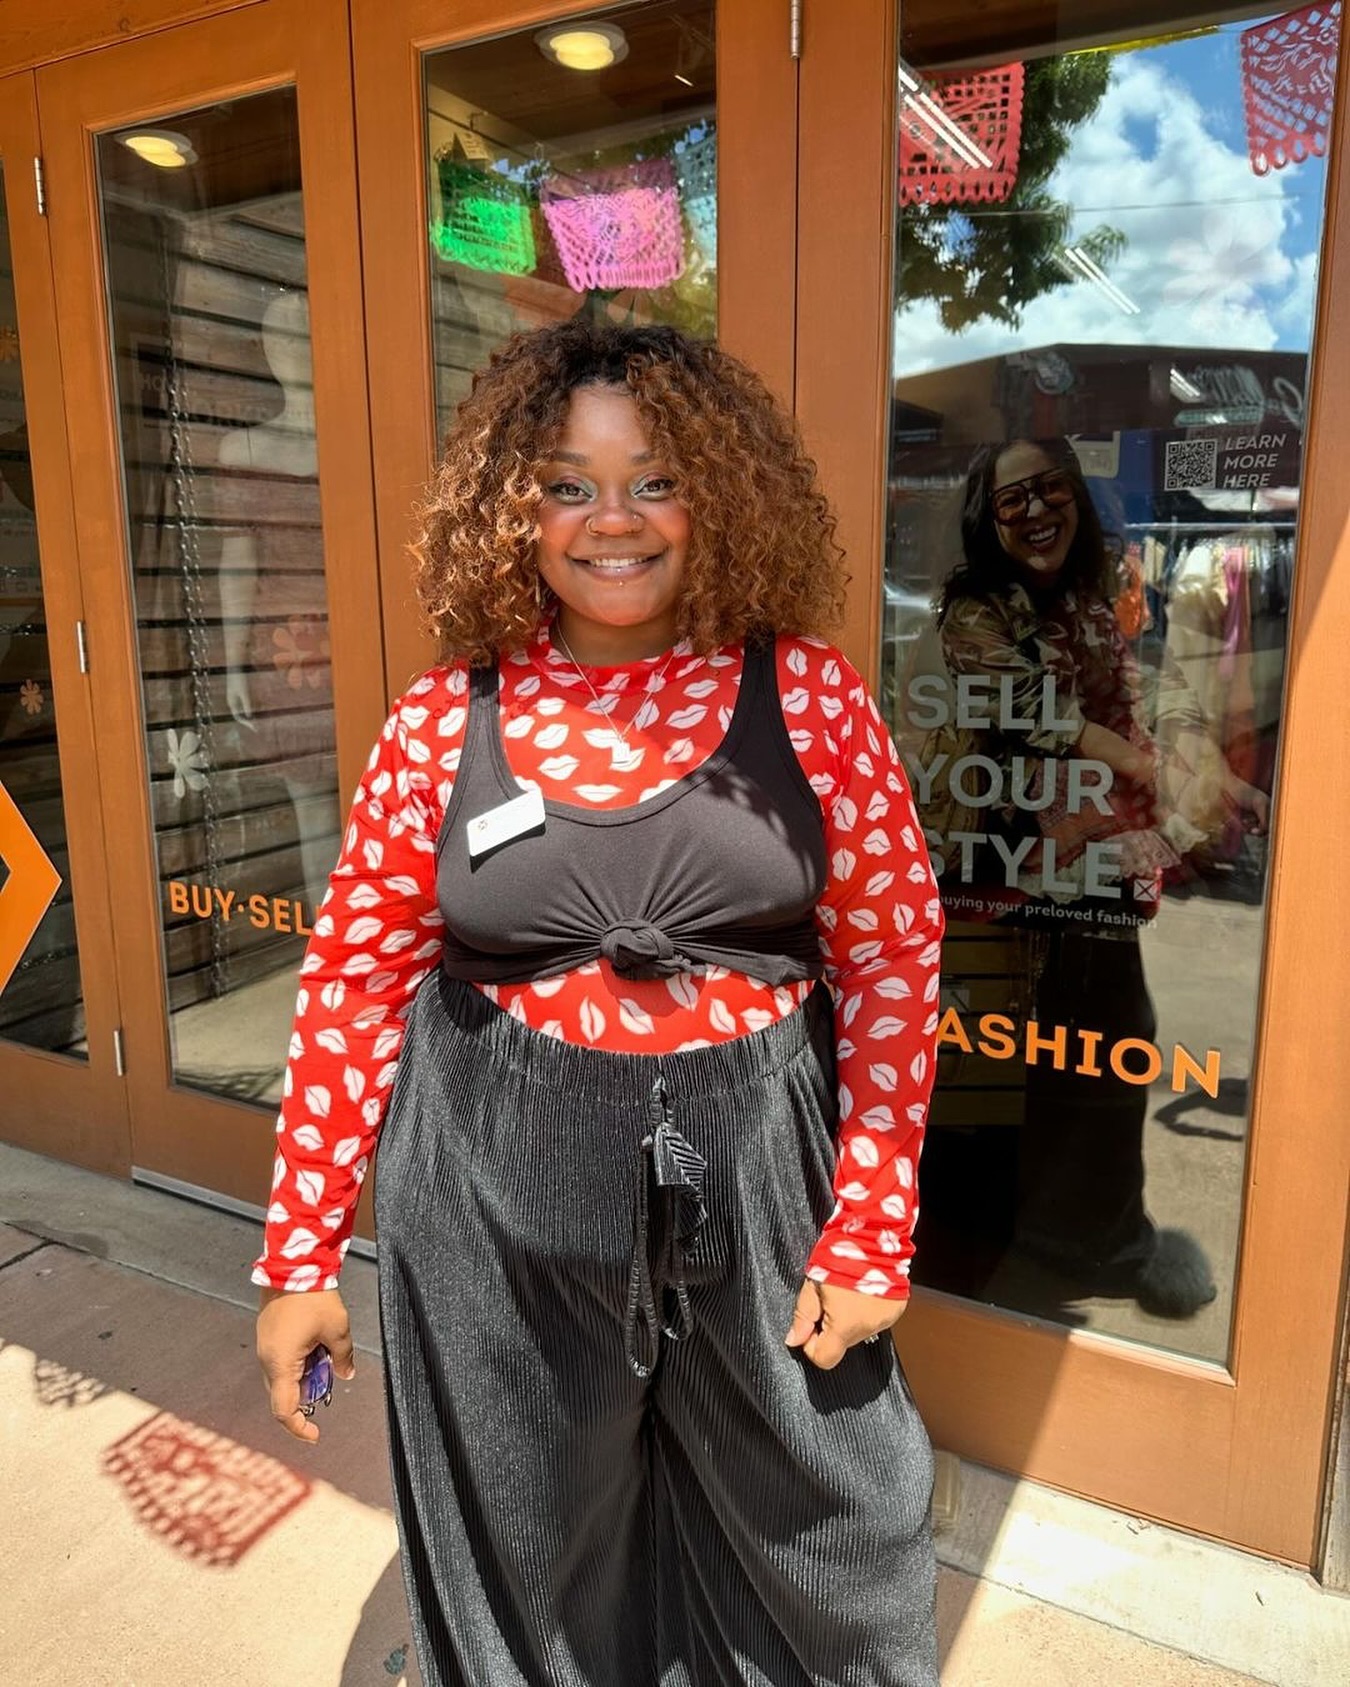 We 🧡 to see our team grow. Congrats to our Dallas store for having a new Buyer join the team! 

If you have a love for fashion, bring that passion to Crossroads! Click the link in our bio to learn about open positions, benefits, and apply online. 🌟

📸: Crossroads Lower Greenville @crossroads_dallas 

#crossroadstrading #crossroadsfinds #crossroadsstore #fashionfinds #buyselltrade #style #thriftfinds #consignment #shopping #womensfashion #mensfashion #fashionblogger #ootd #fashion #thrift #sustainablefashion #secondhandfirst #shopthrift #consignment #thrifted